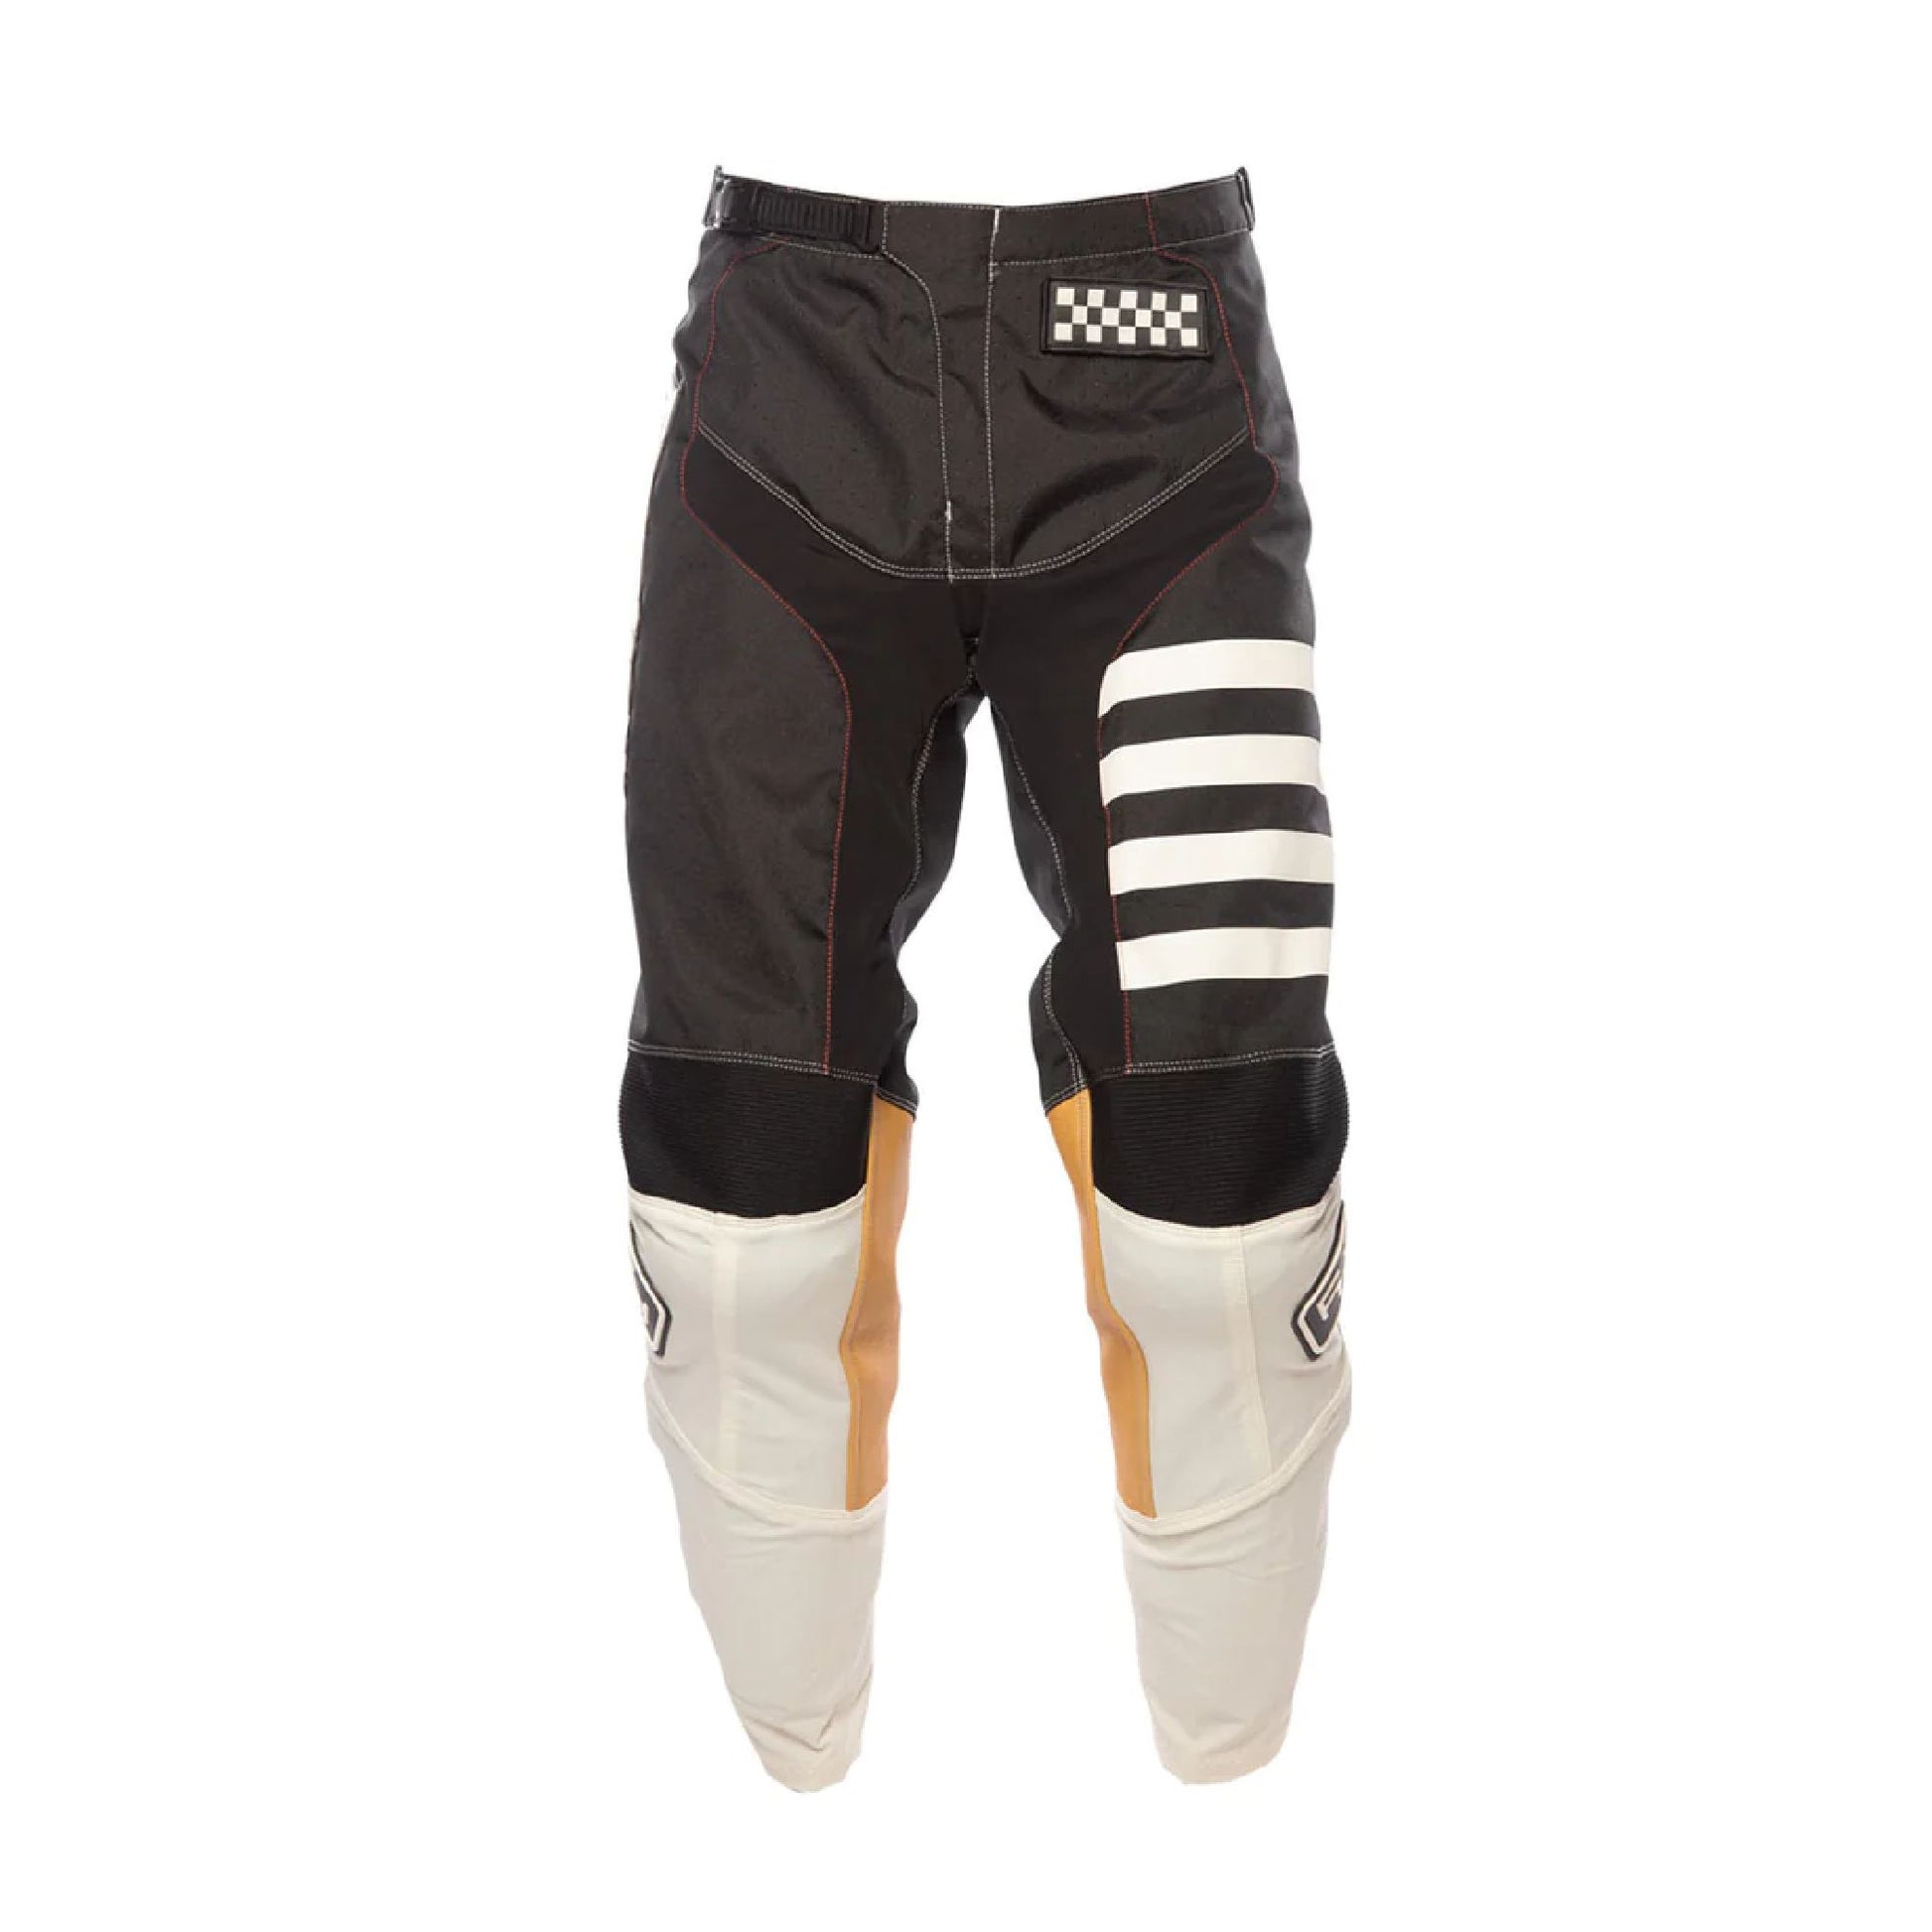 Fasthouse Youth Grindhouse Pants Black Cream Y24 Bike Pants